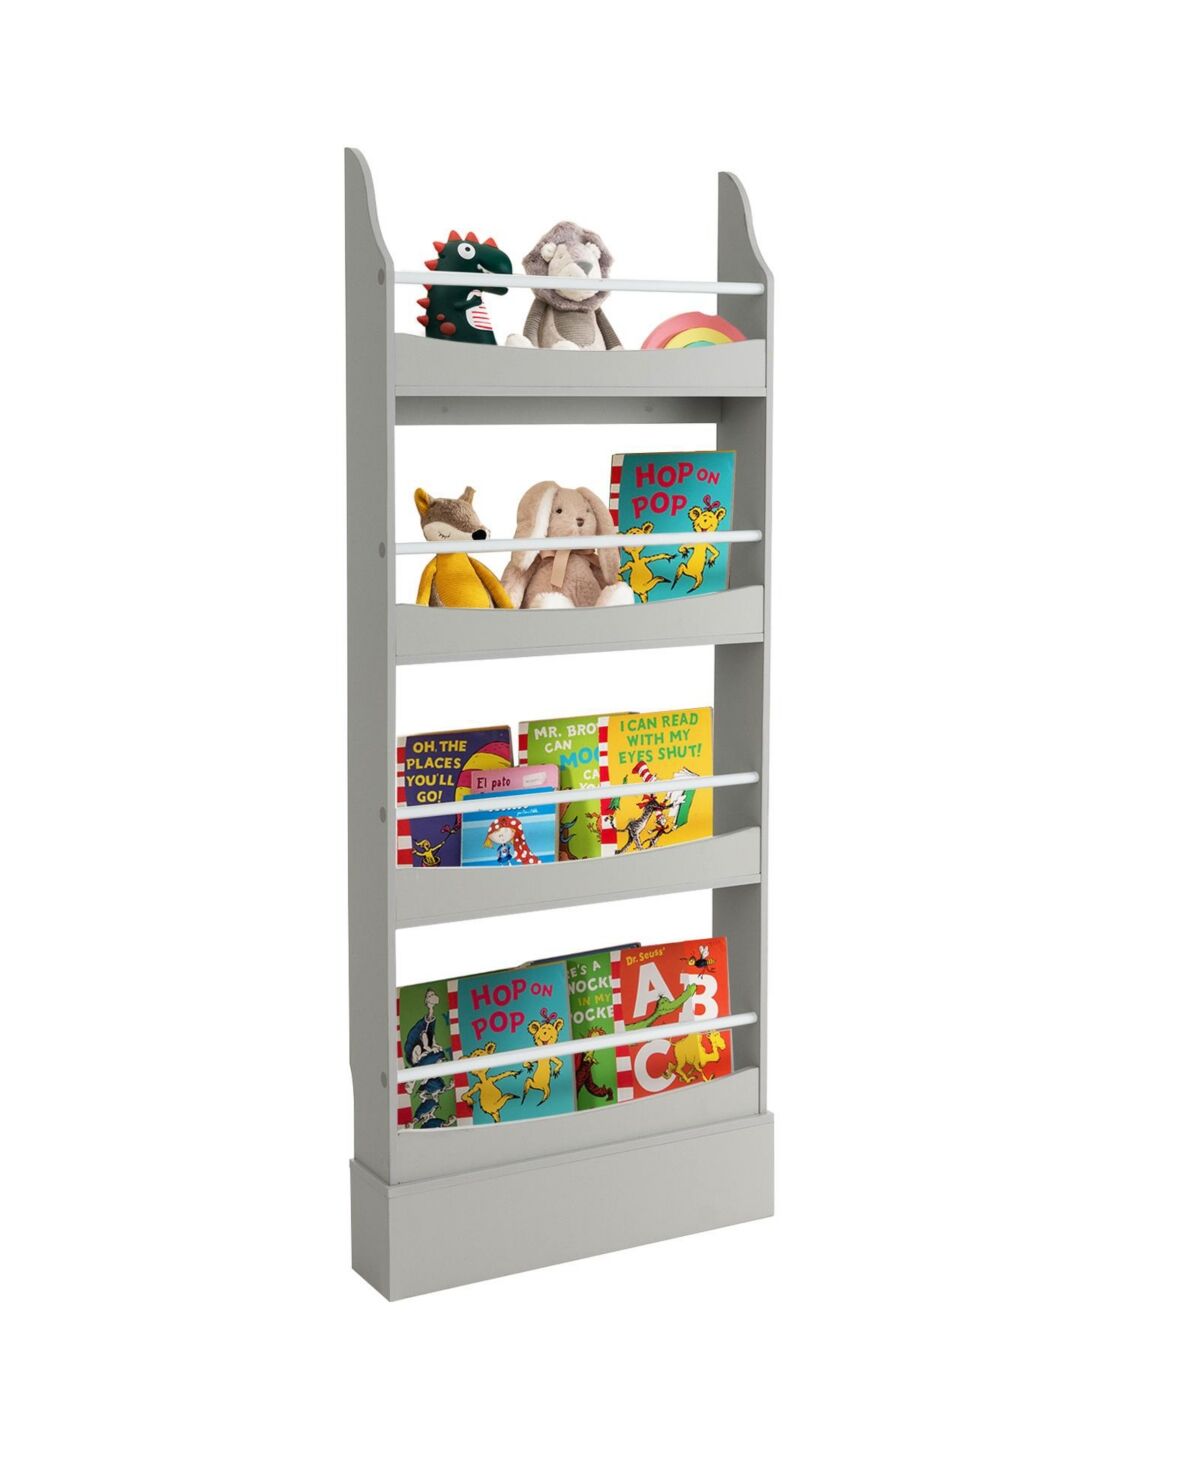 Slickblue 4-Tier Bookshelf with 2 Anti-Tipping Kits for Books and Magazines - Grey